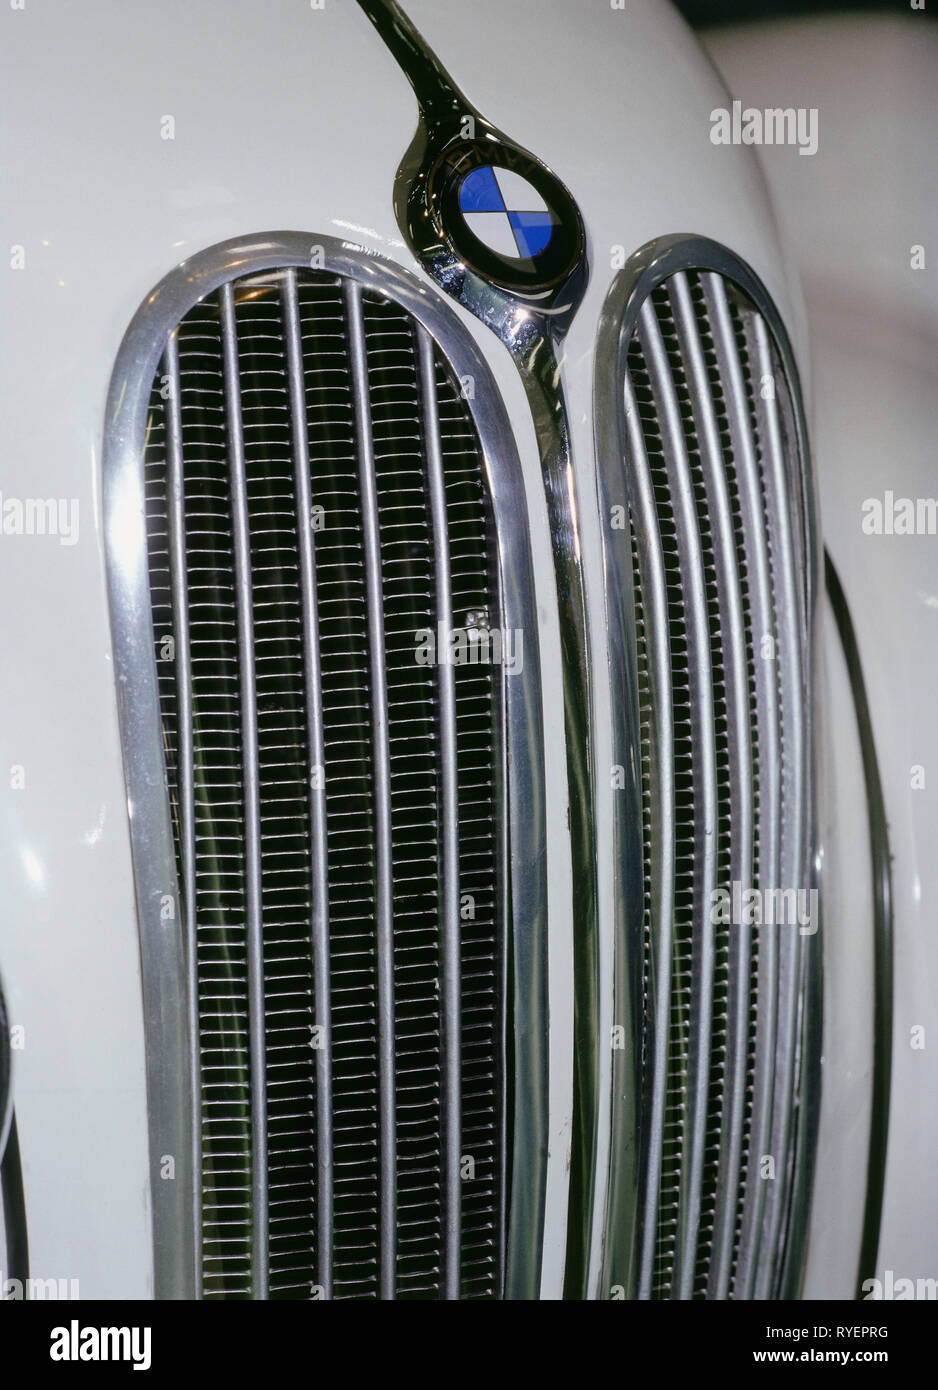 transport / transportation, car, detail, radiator grill of an old BMW, Additional-Rights-Clearance-Info-Not-Available Stock Photo